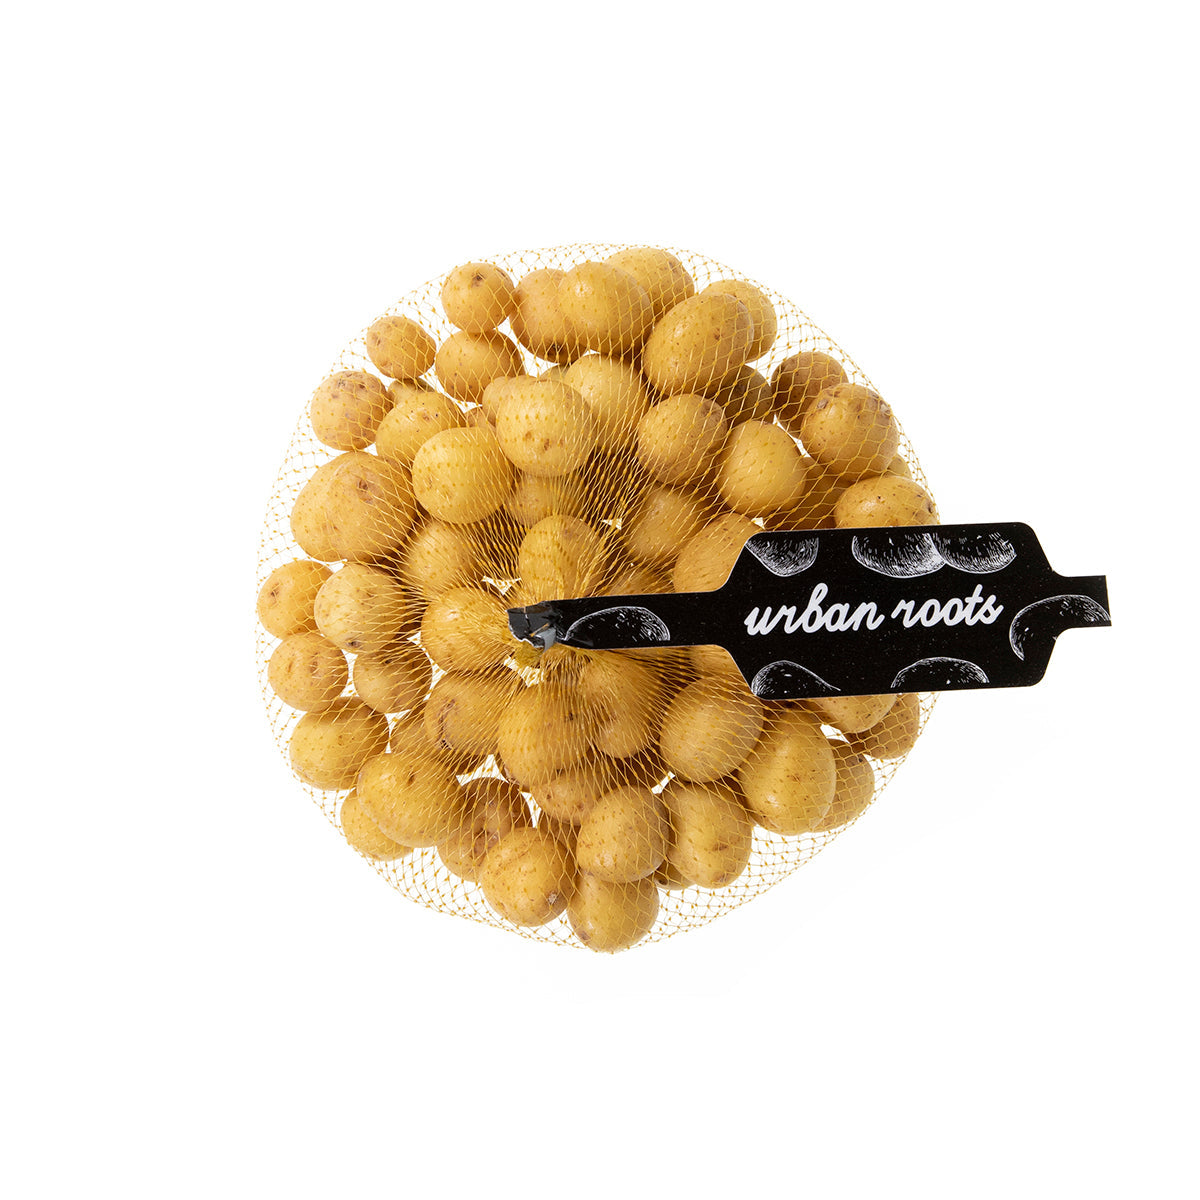 Urban Roots Gold Marble Potatoes 16 OZ